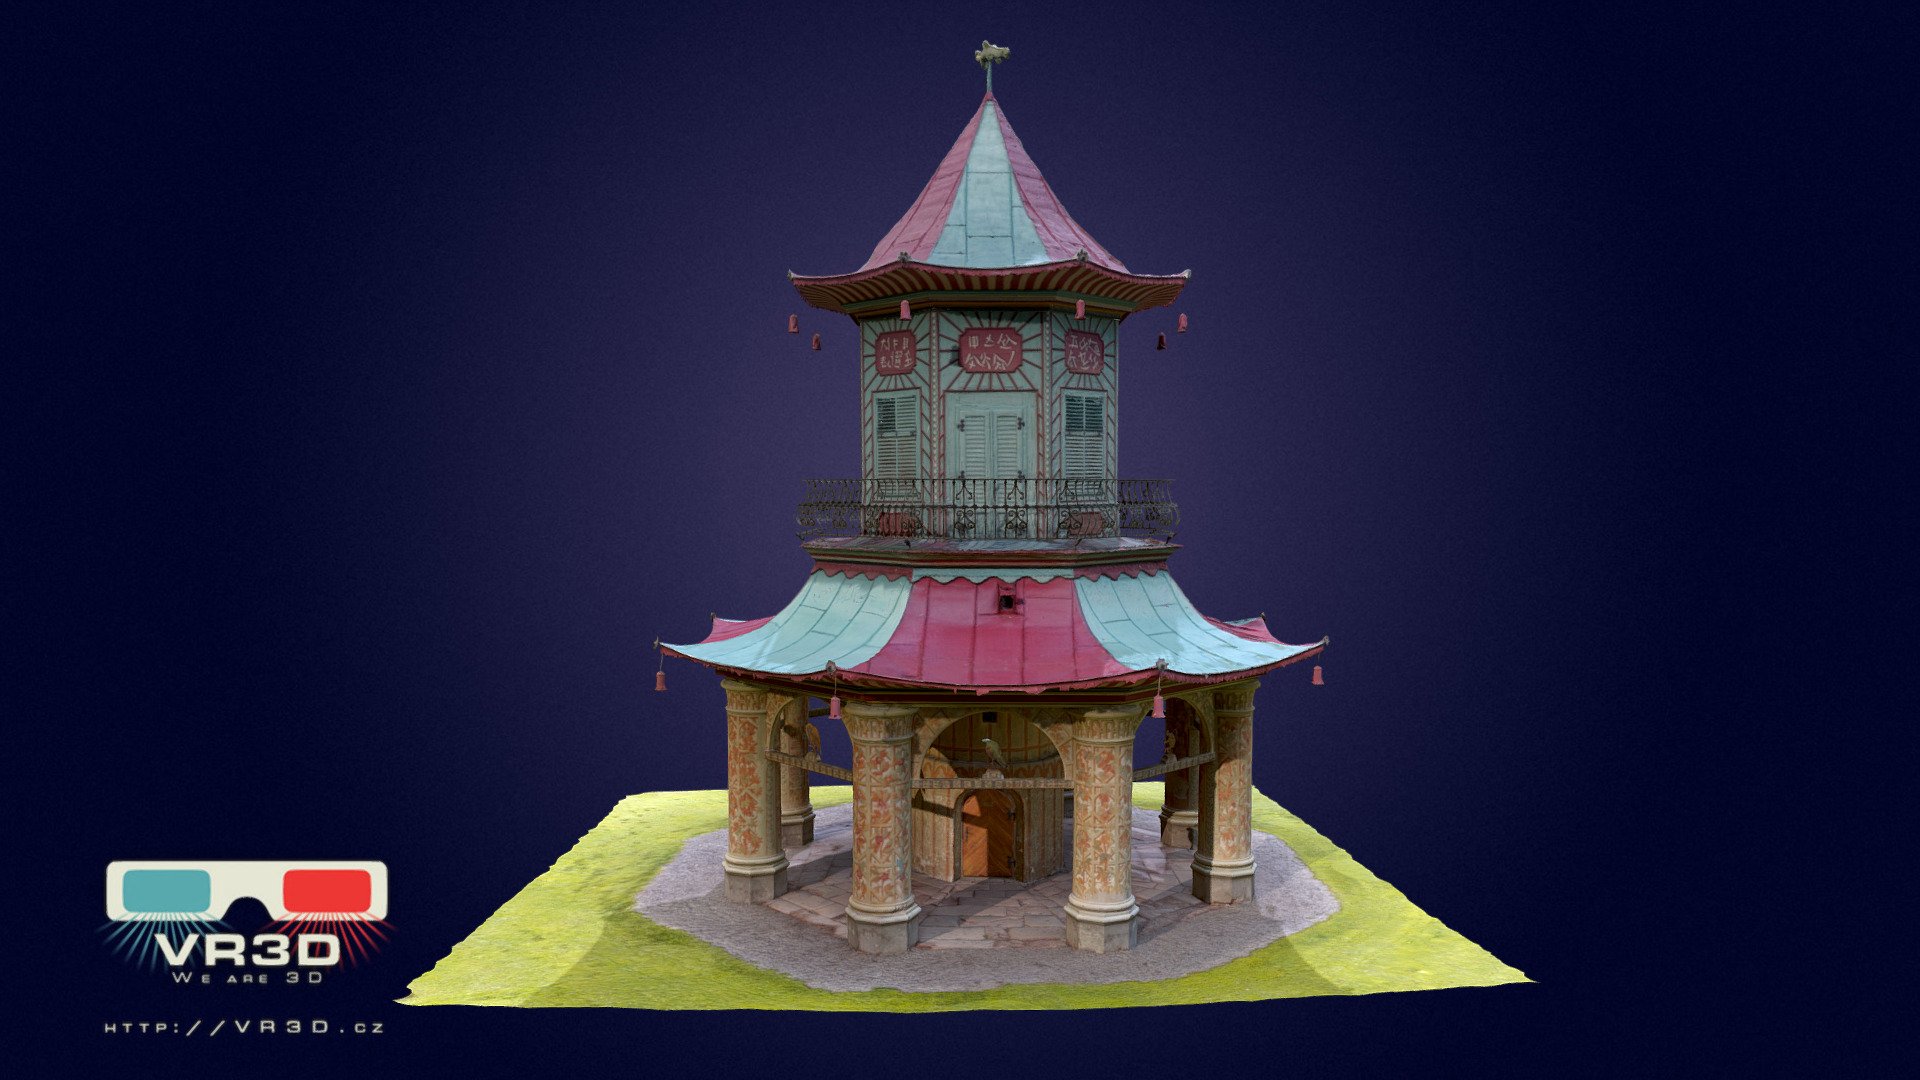 The Chinese Pavilion is still a landmark today. Originally entry to it was by a bridge from an adjoining tower. The interior was furnished in a Chinese style and complemented with a glass bell and Chinese porcelain figures. Aviaries were built near the pavilion.
The present form of the structure is the result of alterations carried out in the 19th century. 

Before you ask, no, i can't allow download for this model, sorry :(

VR3D - We are 3D | 3D scanning | vr3d.cz - Chinese Pavilion in Vlašim, Czech Republic - 3D model by VR3D.CZ | Libor Telupil (@libortelupil) 3d model